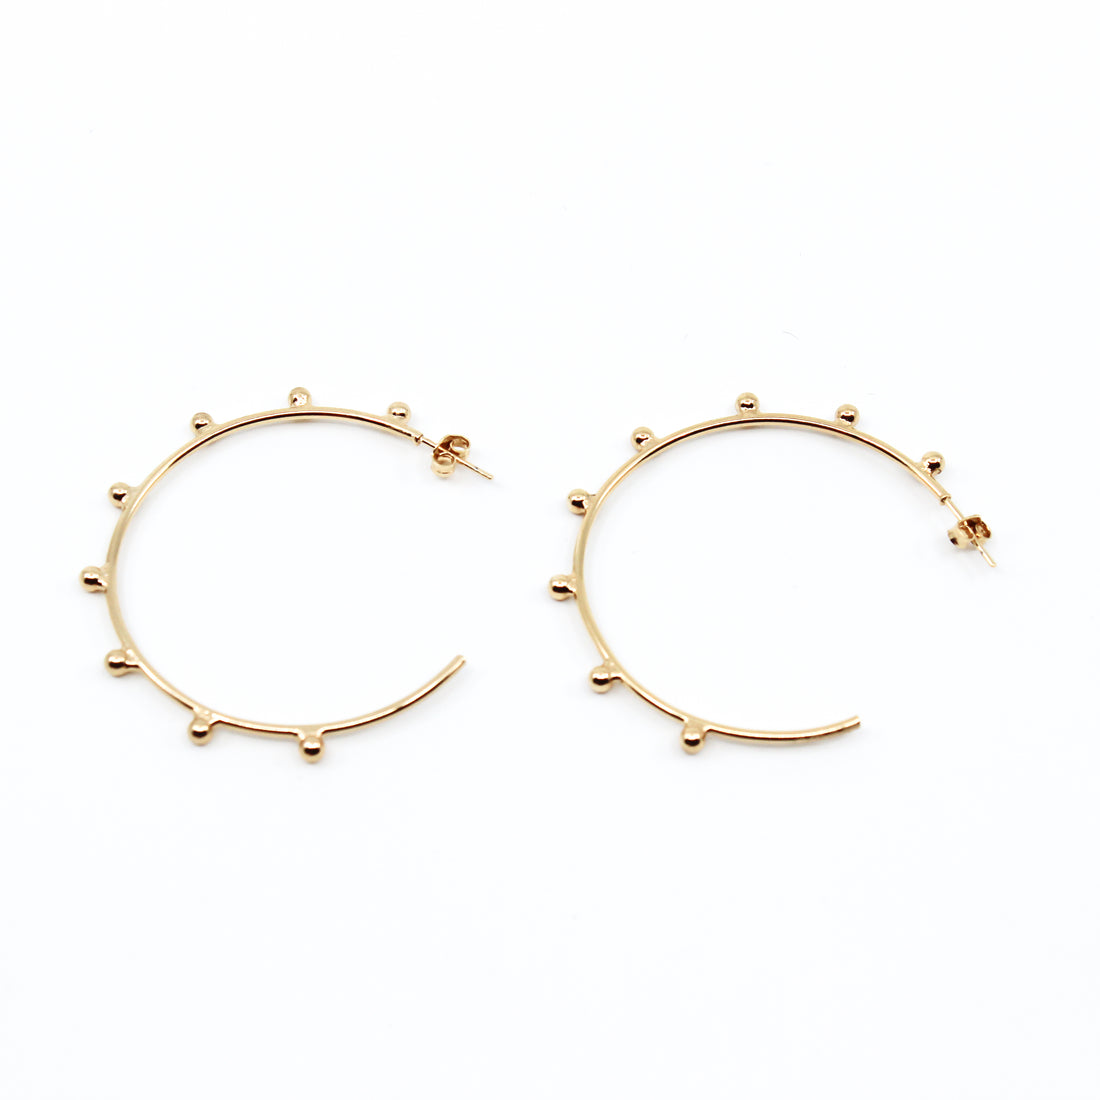 Gold Beaded 2 inch hoops I MCHARMS